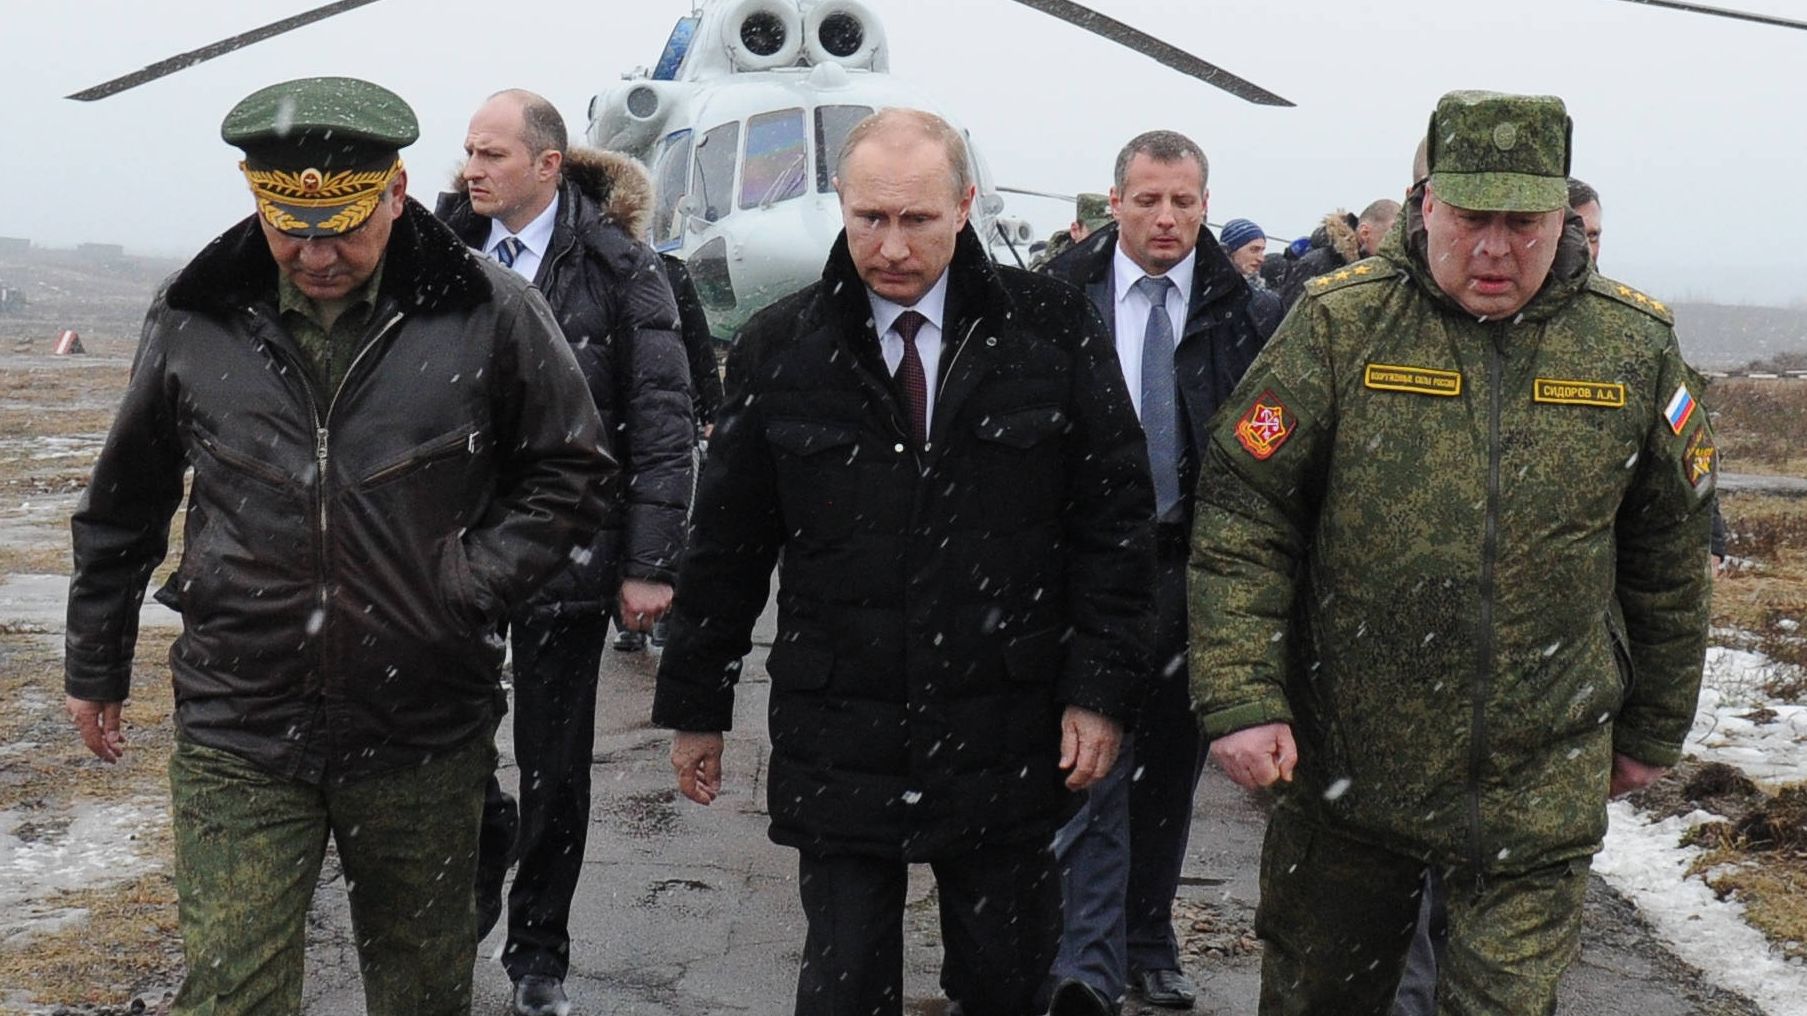 Russian President Vladimir Putin arrives to watch a military exercise near St.Petersburg, Russia, Monday